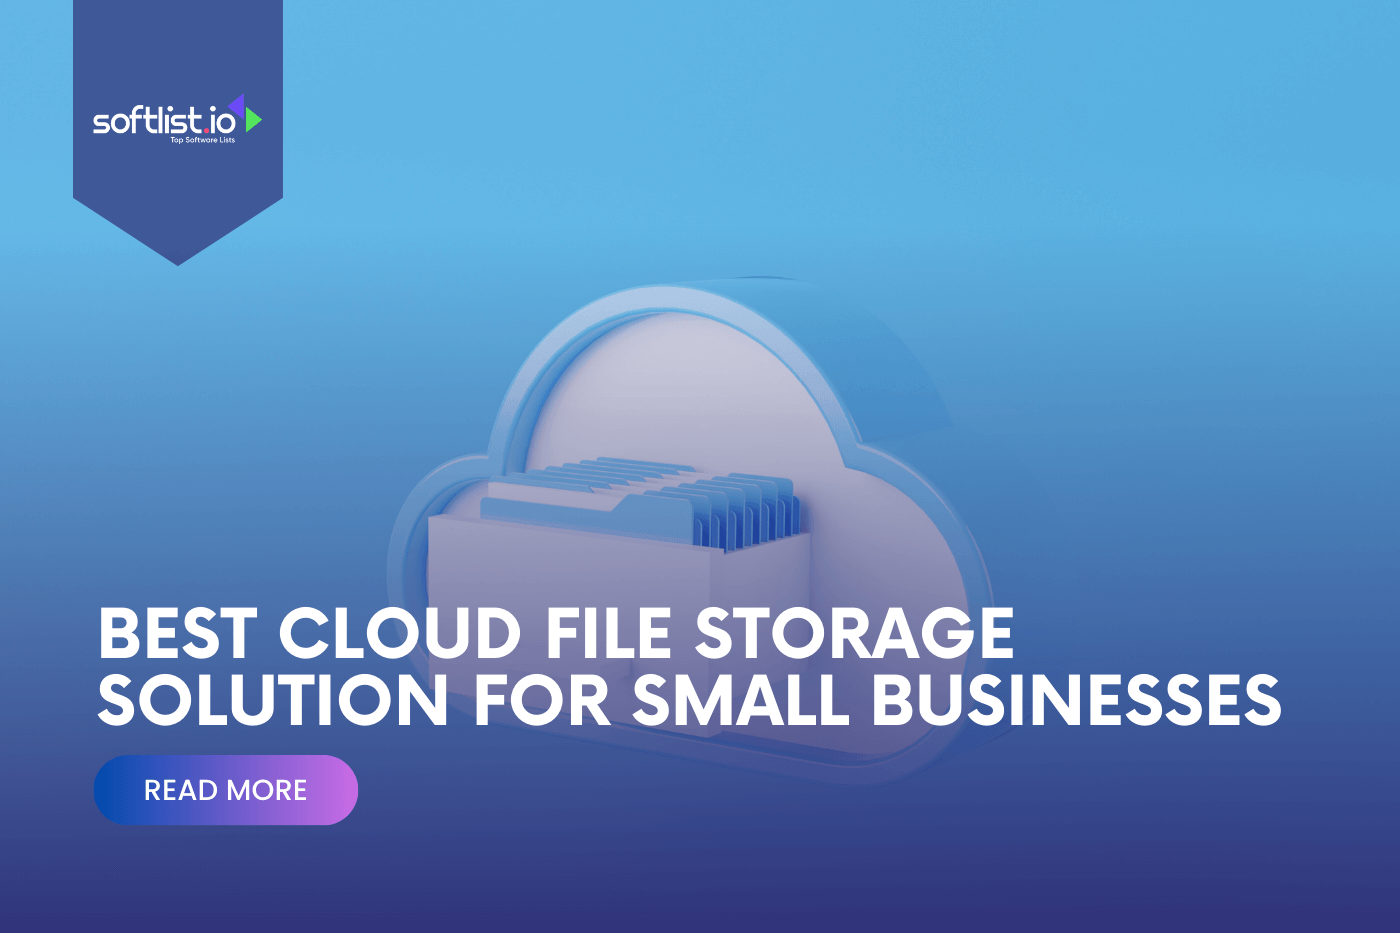 Best Cloud File Storage Solution for Small Businesses